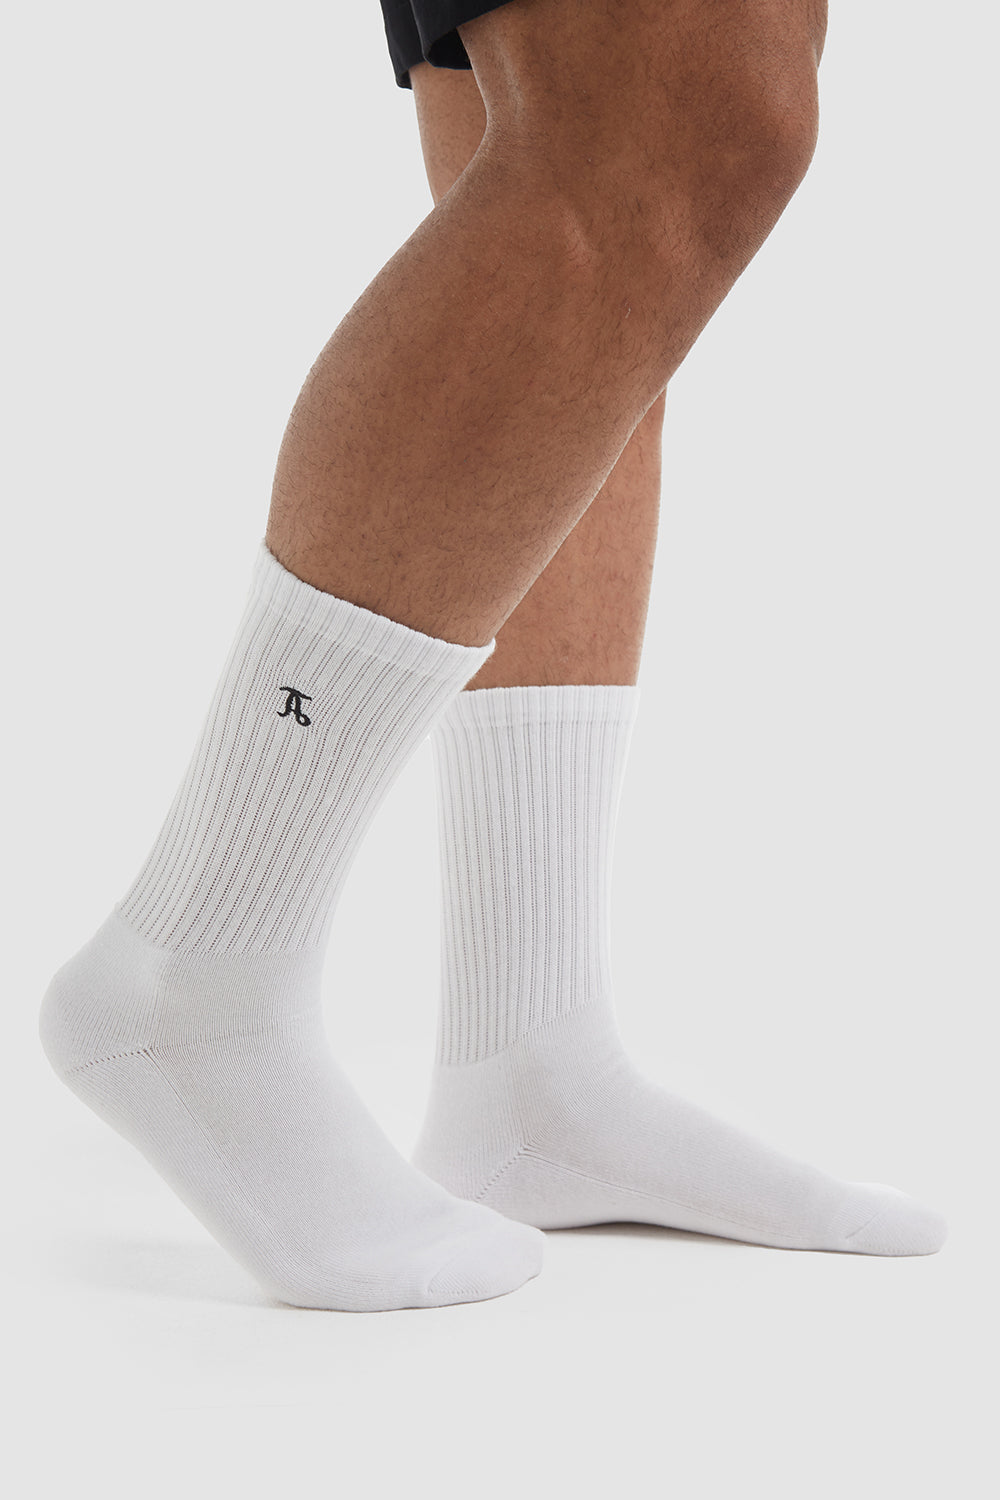 3 Pack Sports Socks in White - TAILORED ATHLETE - ROW